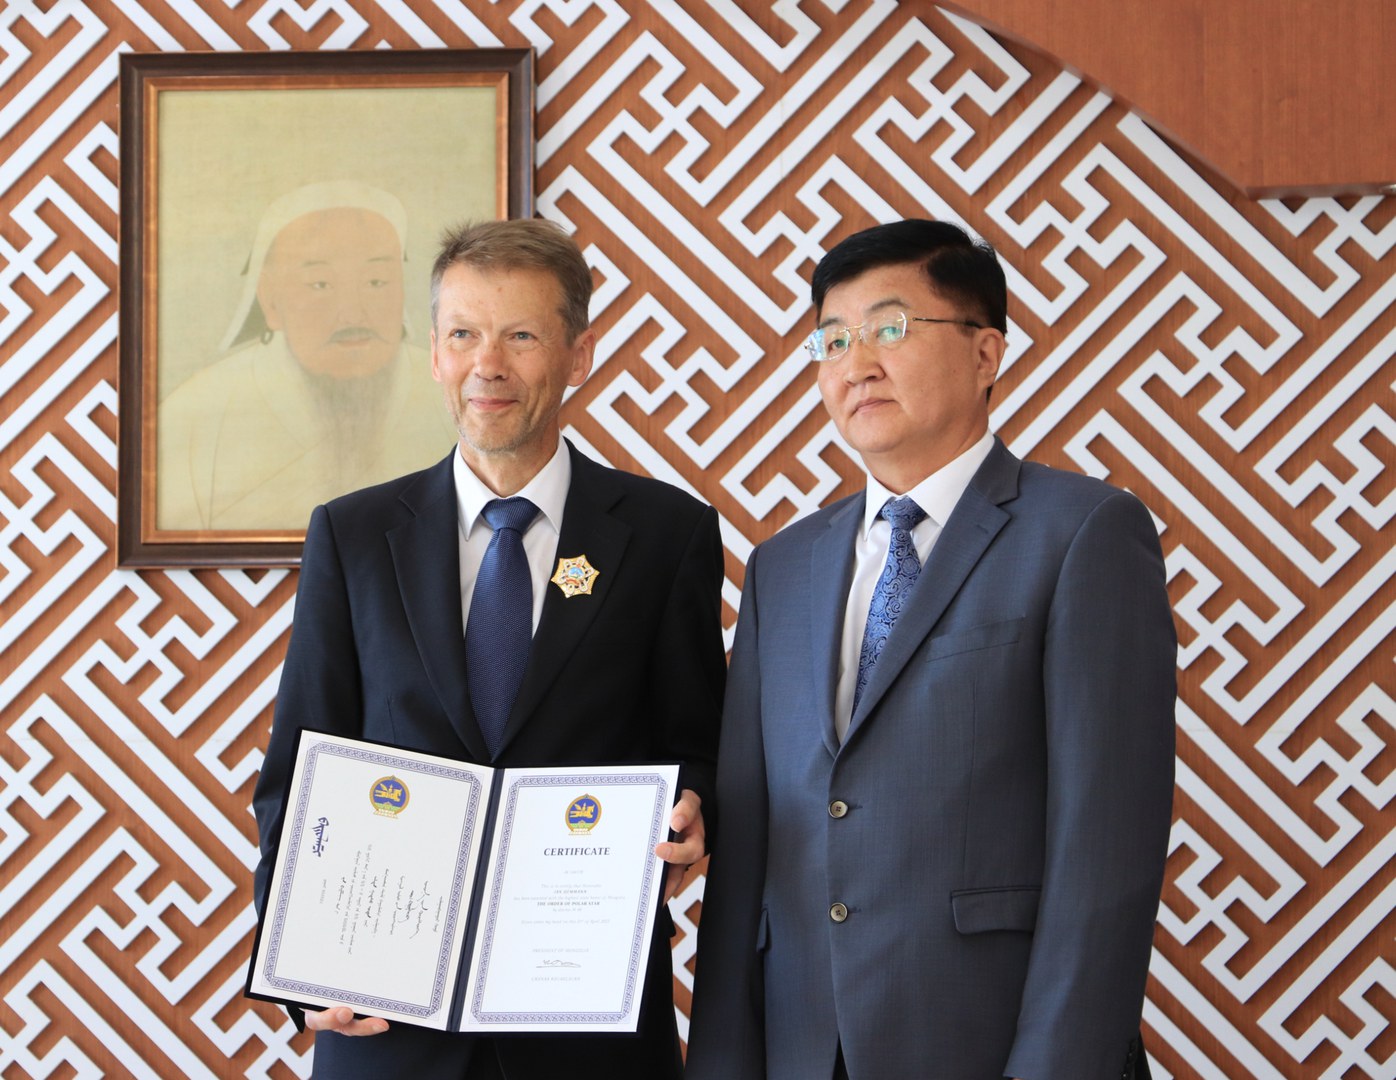 Prof. Dr. Dr. h.c. Jan Bemmann (left) - with the polar star on his lapel and the certificate - and State Secretary M. Batgerel (right) at the Ministry of Education and Science of Mongolia in Ulaanbaatar.